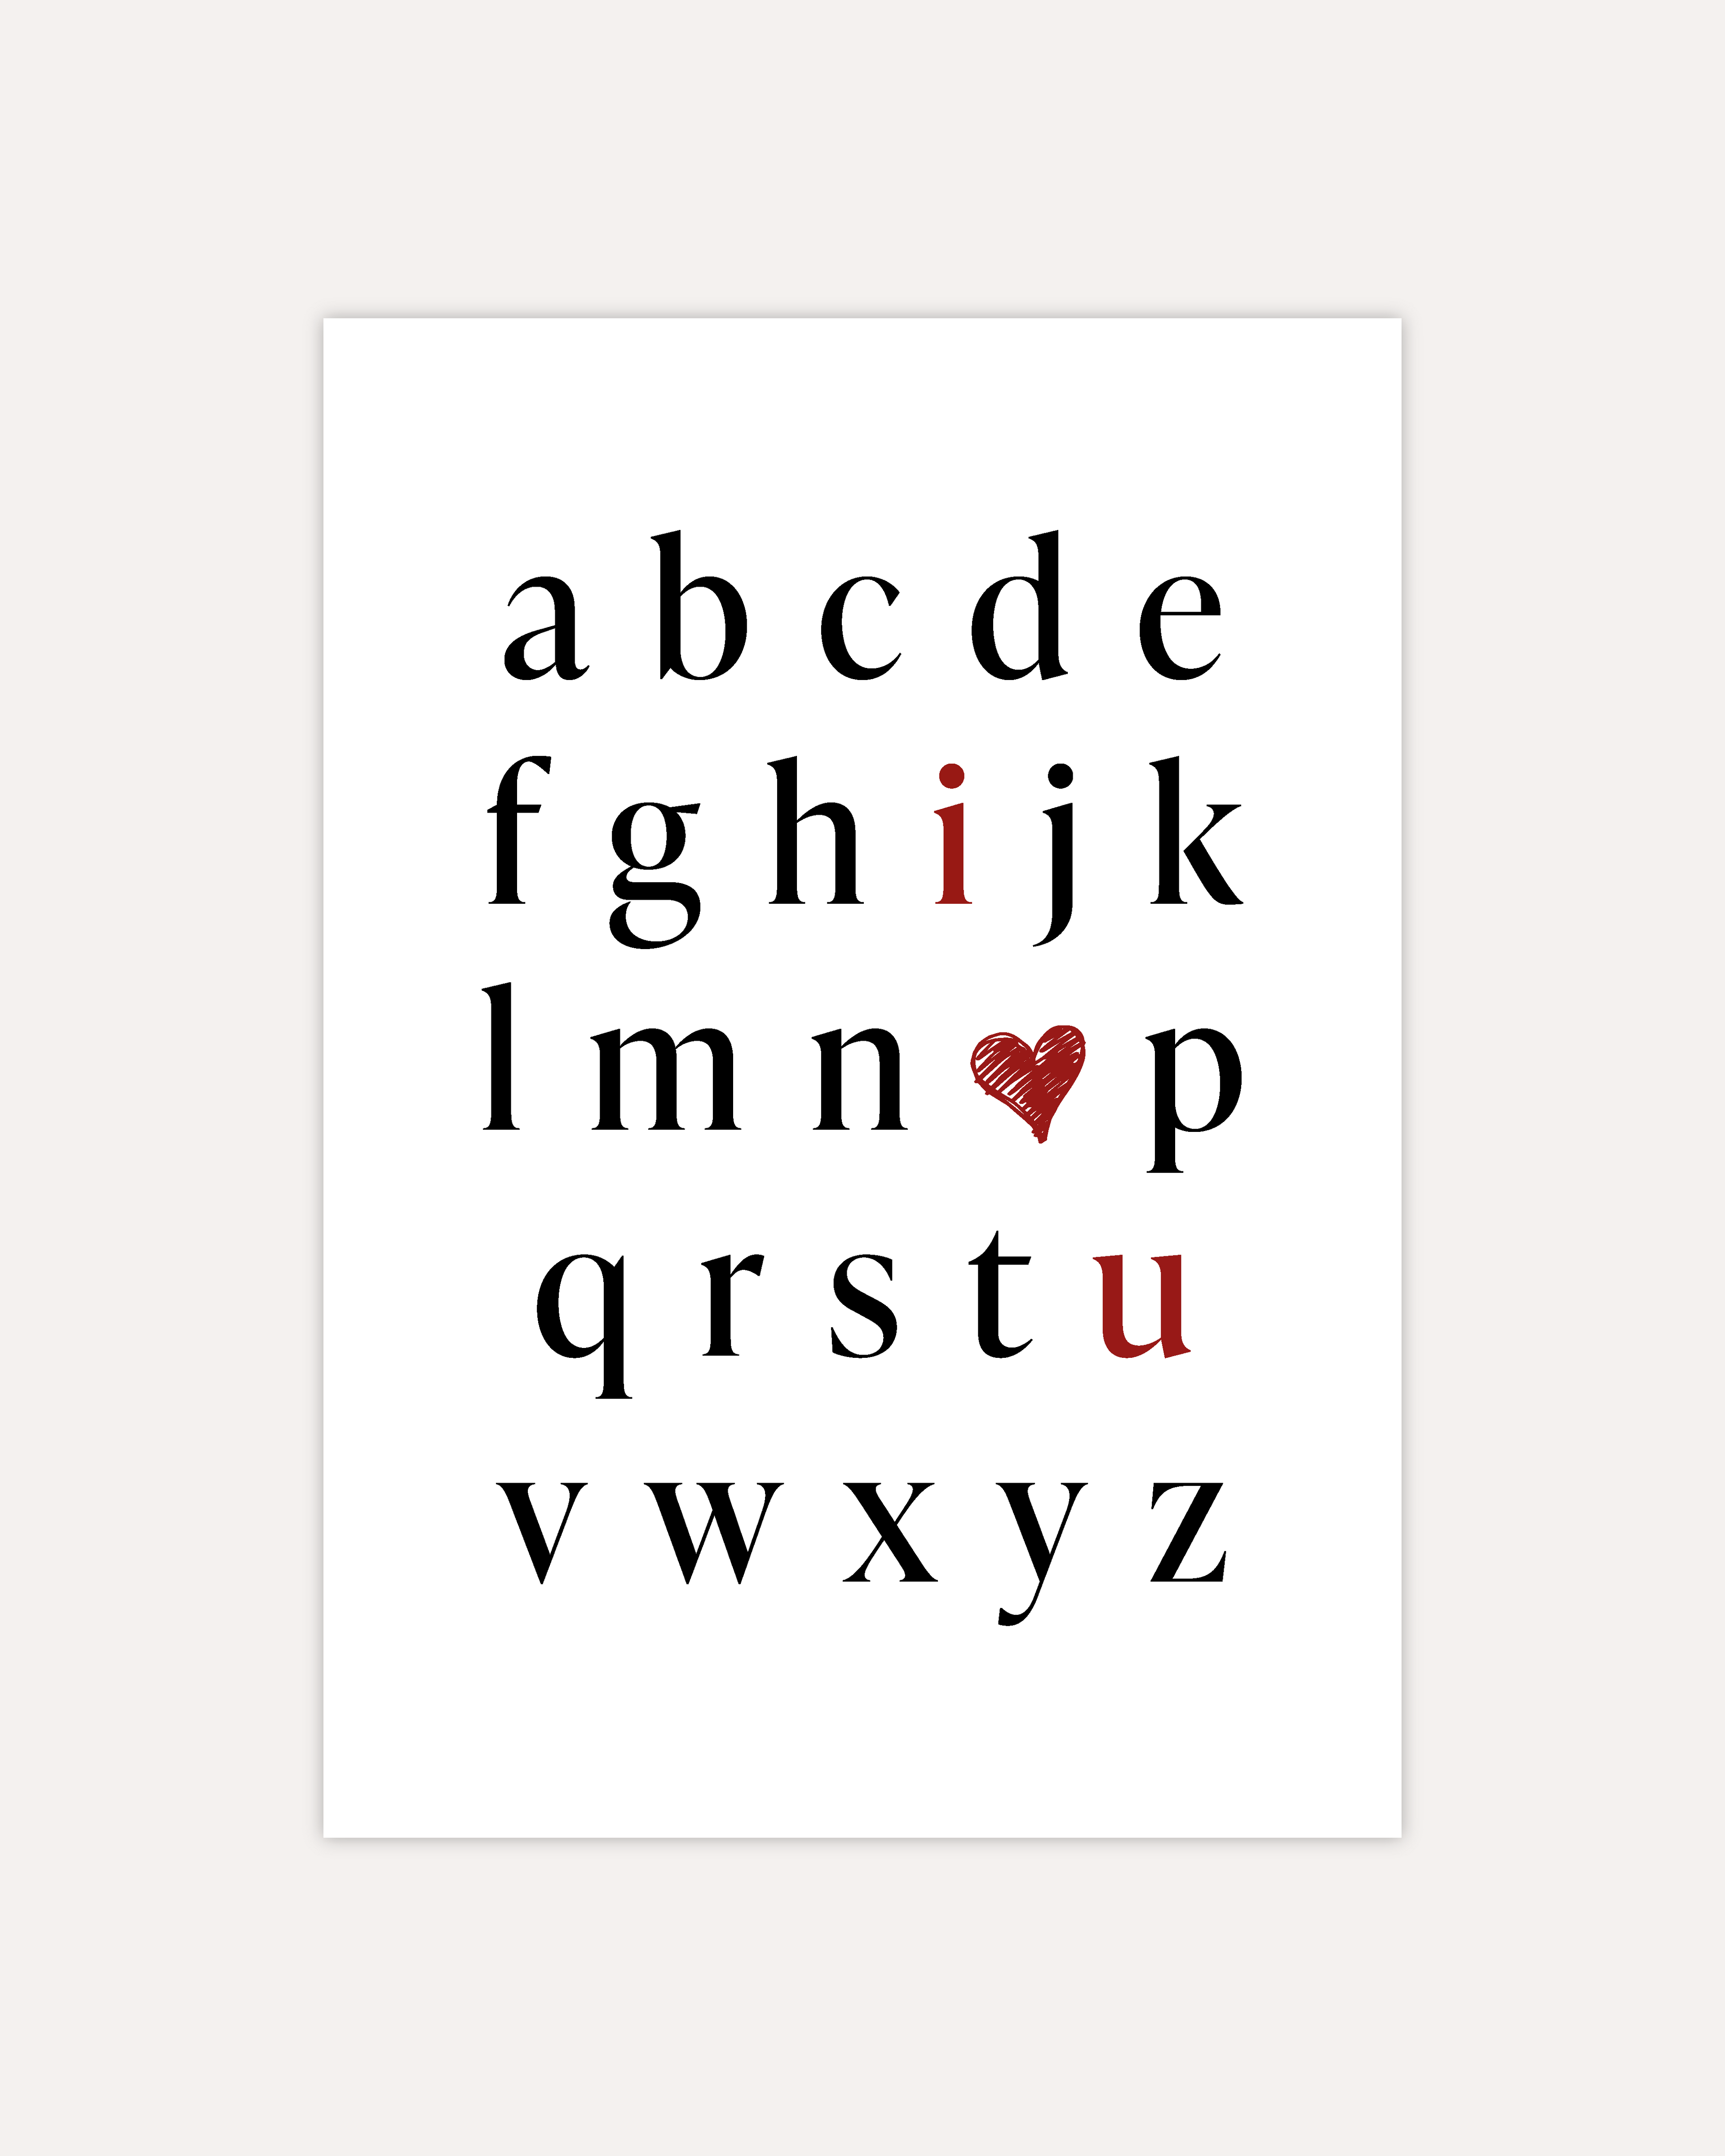 A postcard design showing the alphabet in mostly black letters. The letters &quot;i&quot; and &quot;u&quot; are red. In place of the letter &quot;o&quot; there is a red heart. The letters are arranged in a way that the red letters and heart read &quot;I love you&quot;. The design is shown on a beige background.